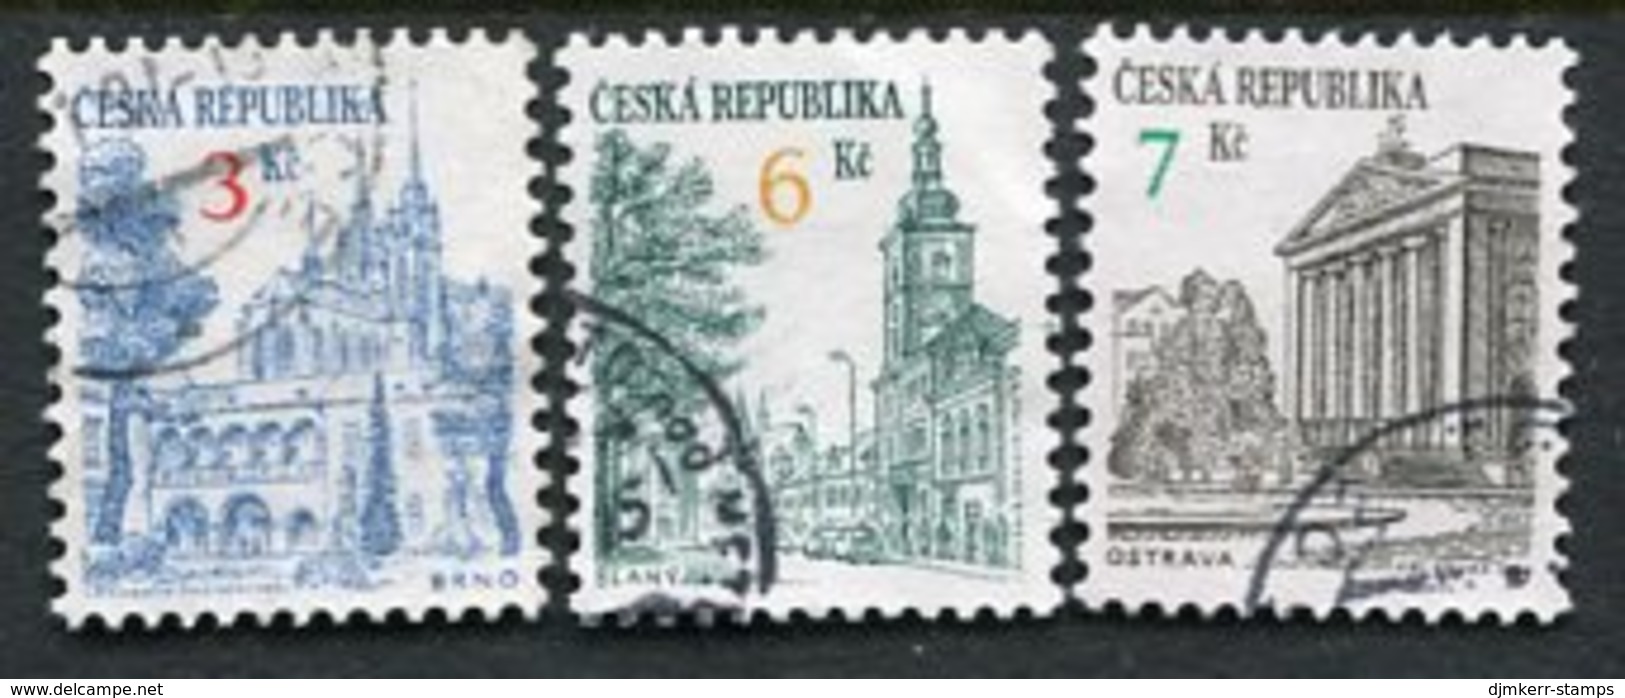 CZECH REPUBLIC 1994 Towns Definitive New Values Used  Michel 35, 52, 60 - Used Stamps